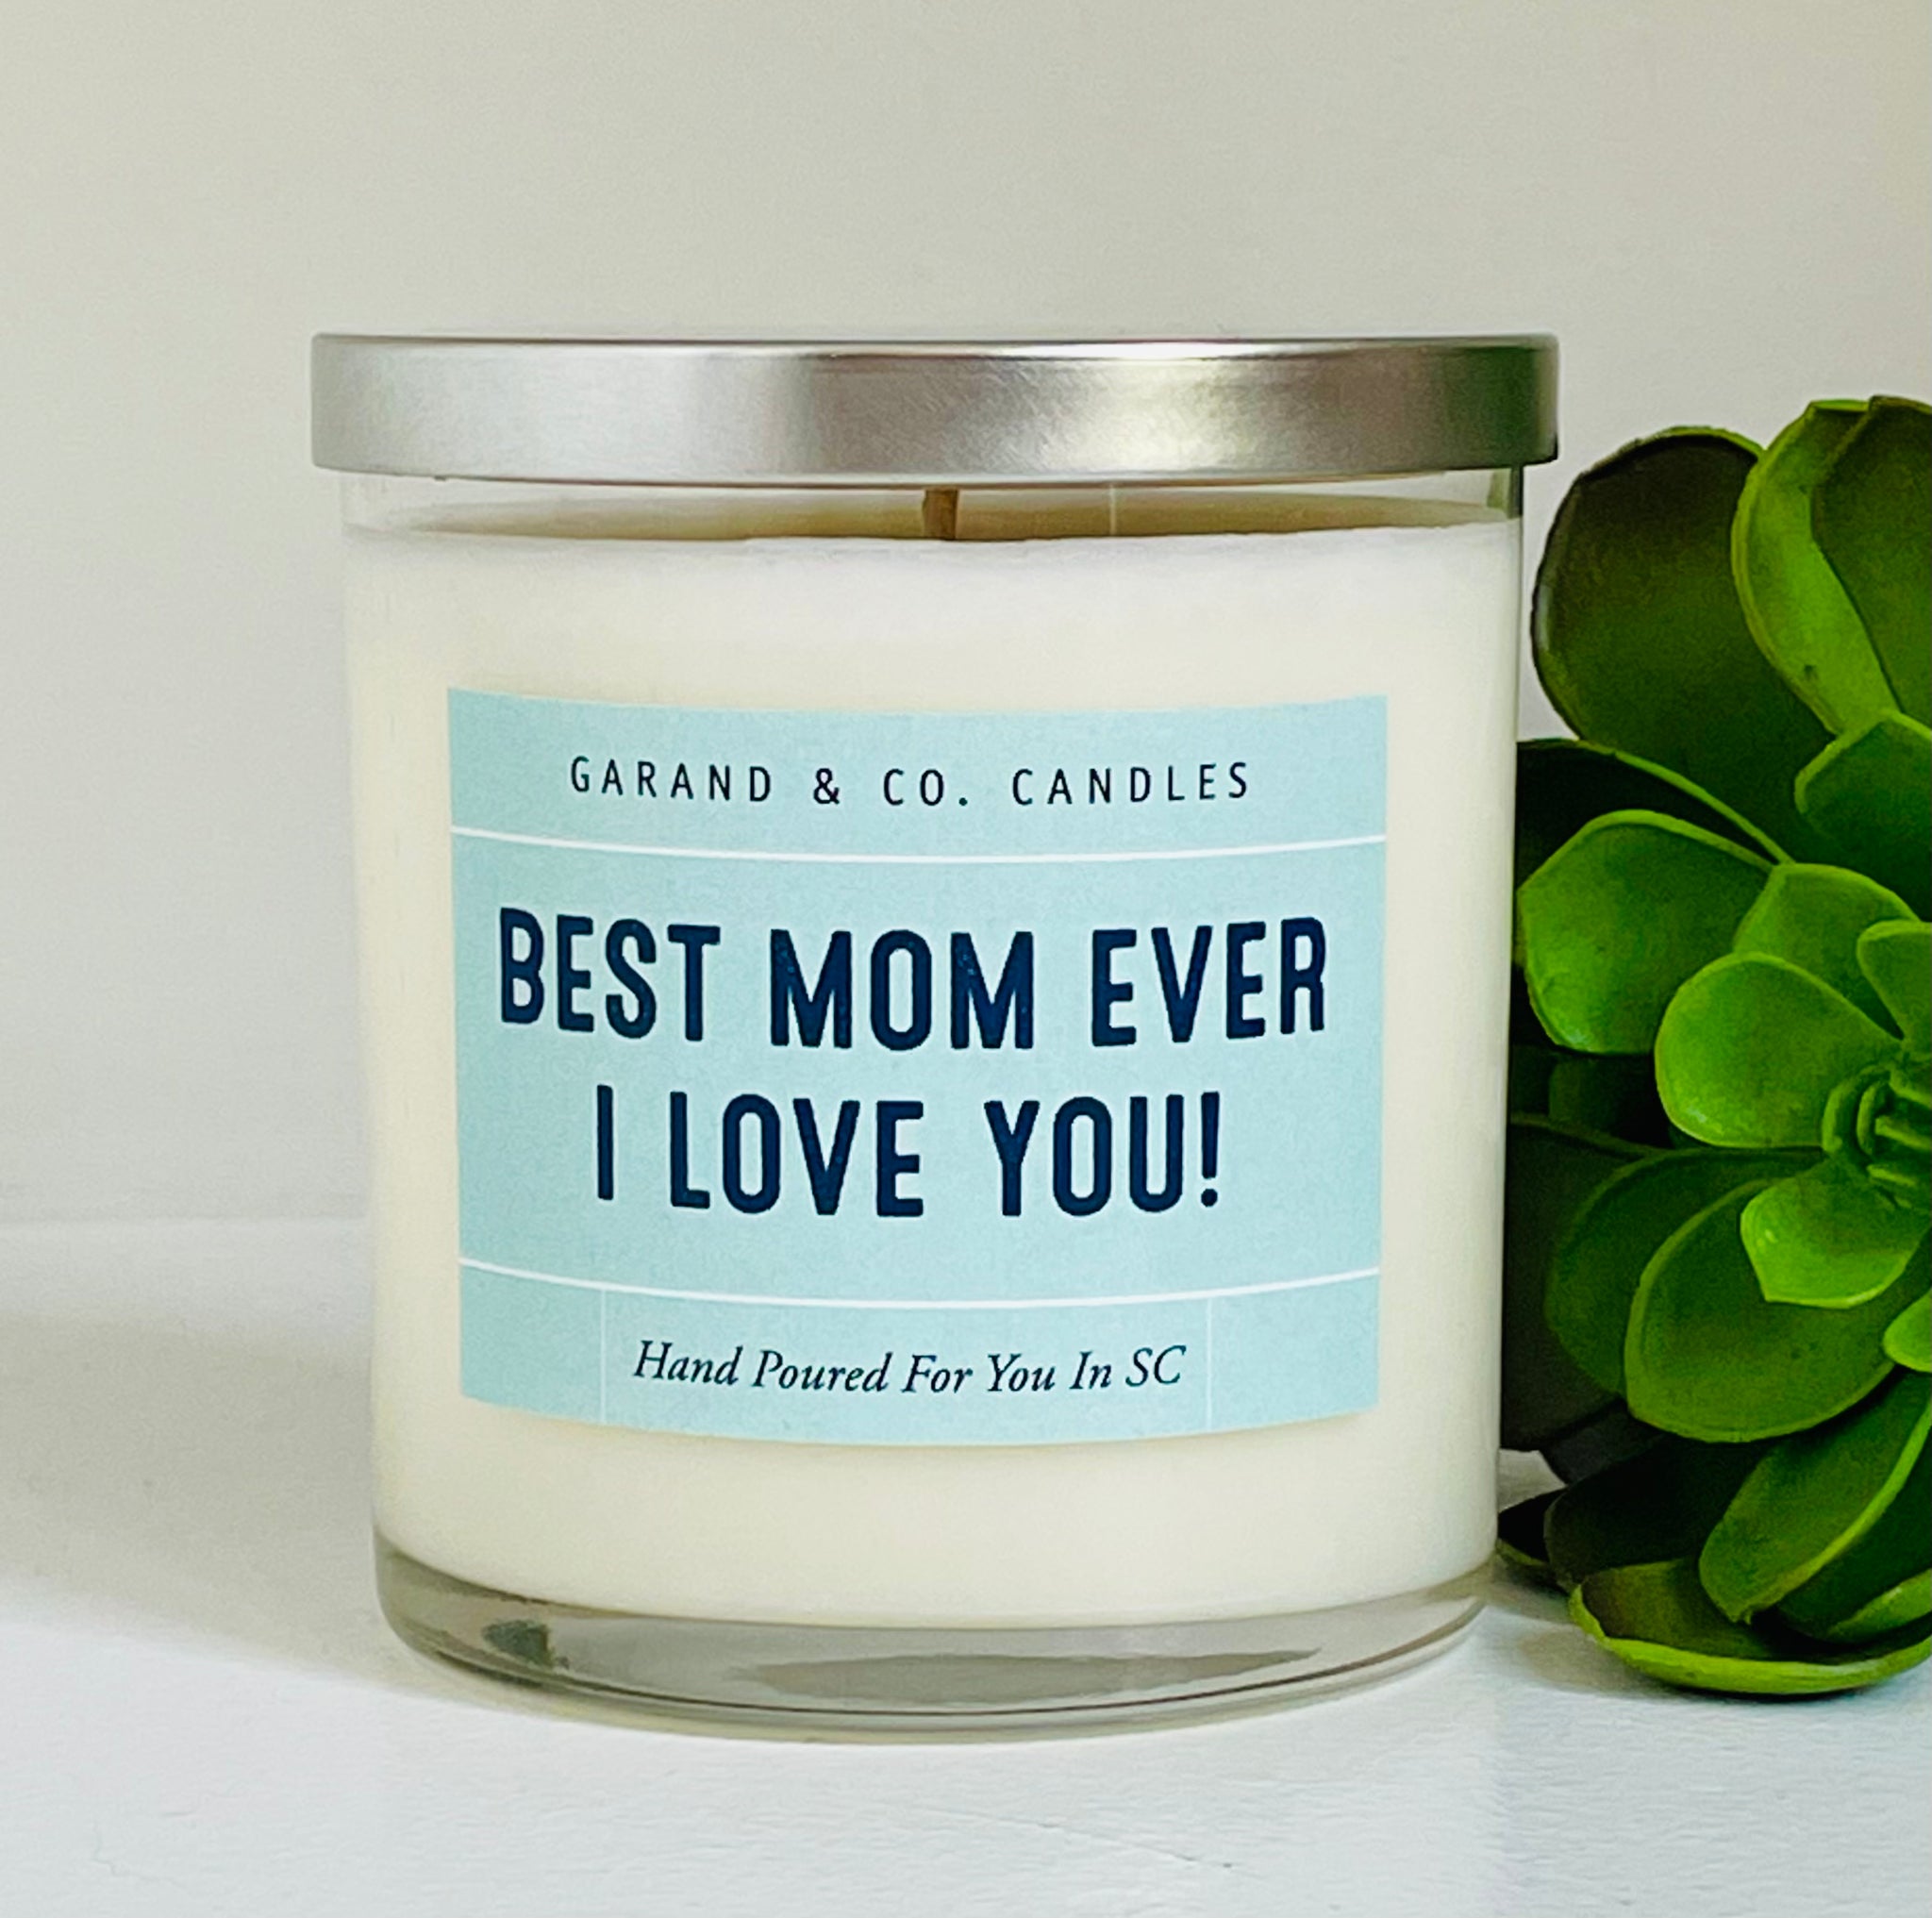 12 oz Clear Glass Jar Candle - Best Mom Ever - I Love You